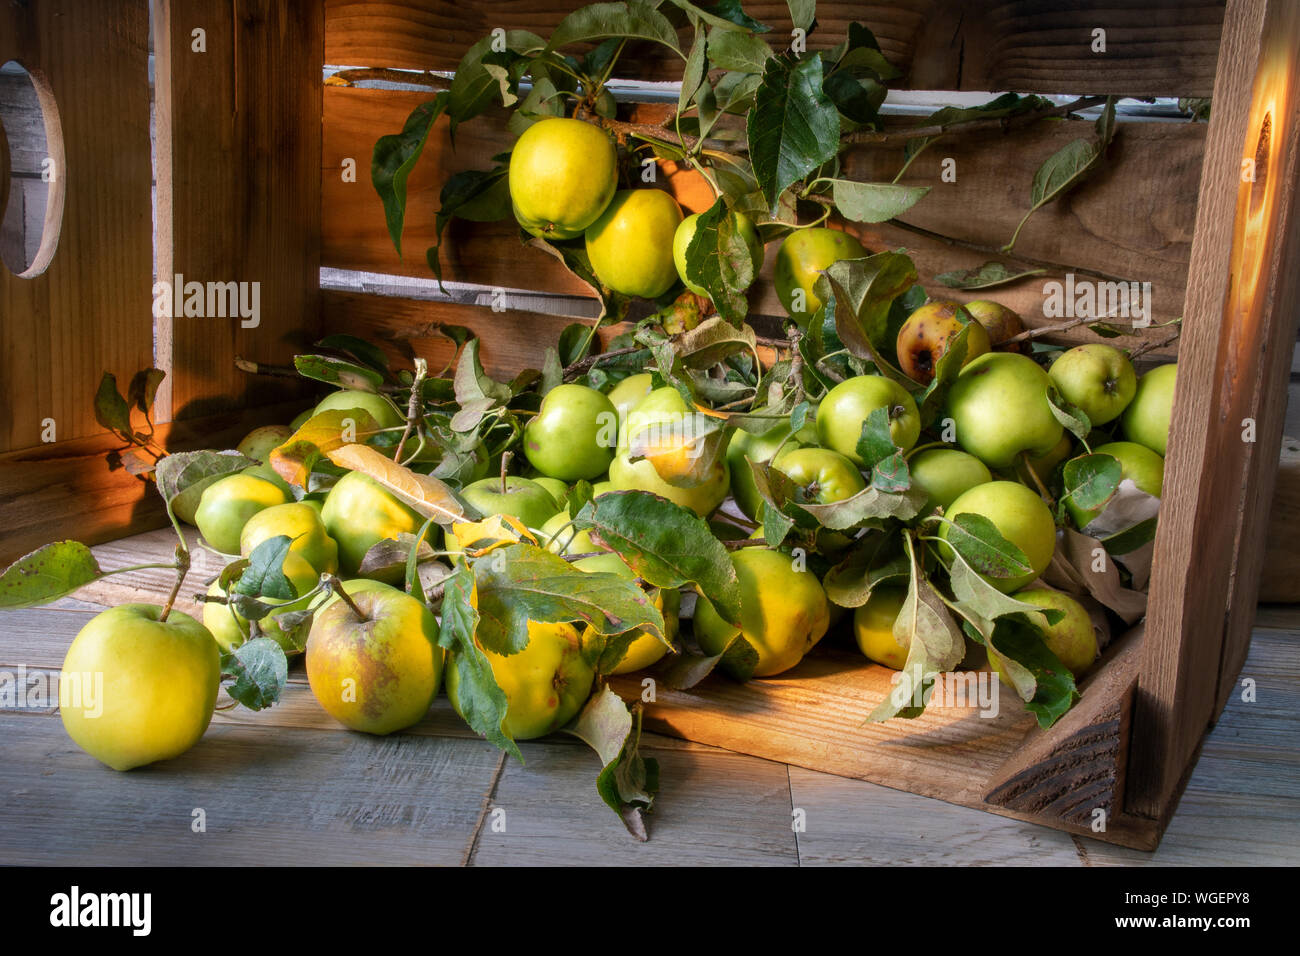 Wooden box of harvested apples ready to be prepared for making home produced preserves and apple brandy. Stock Photo